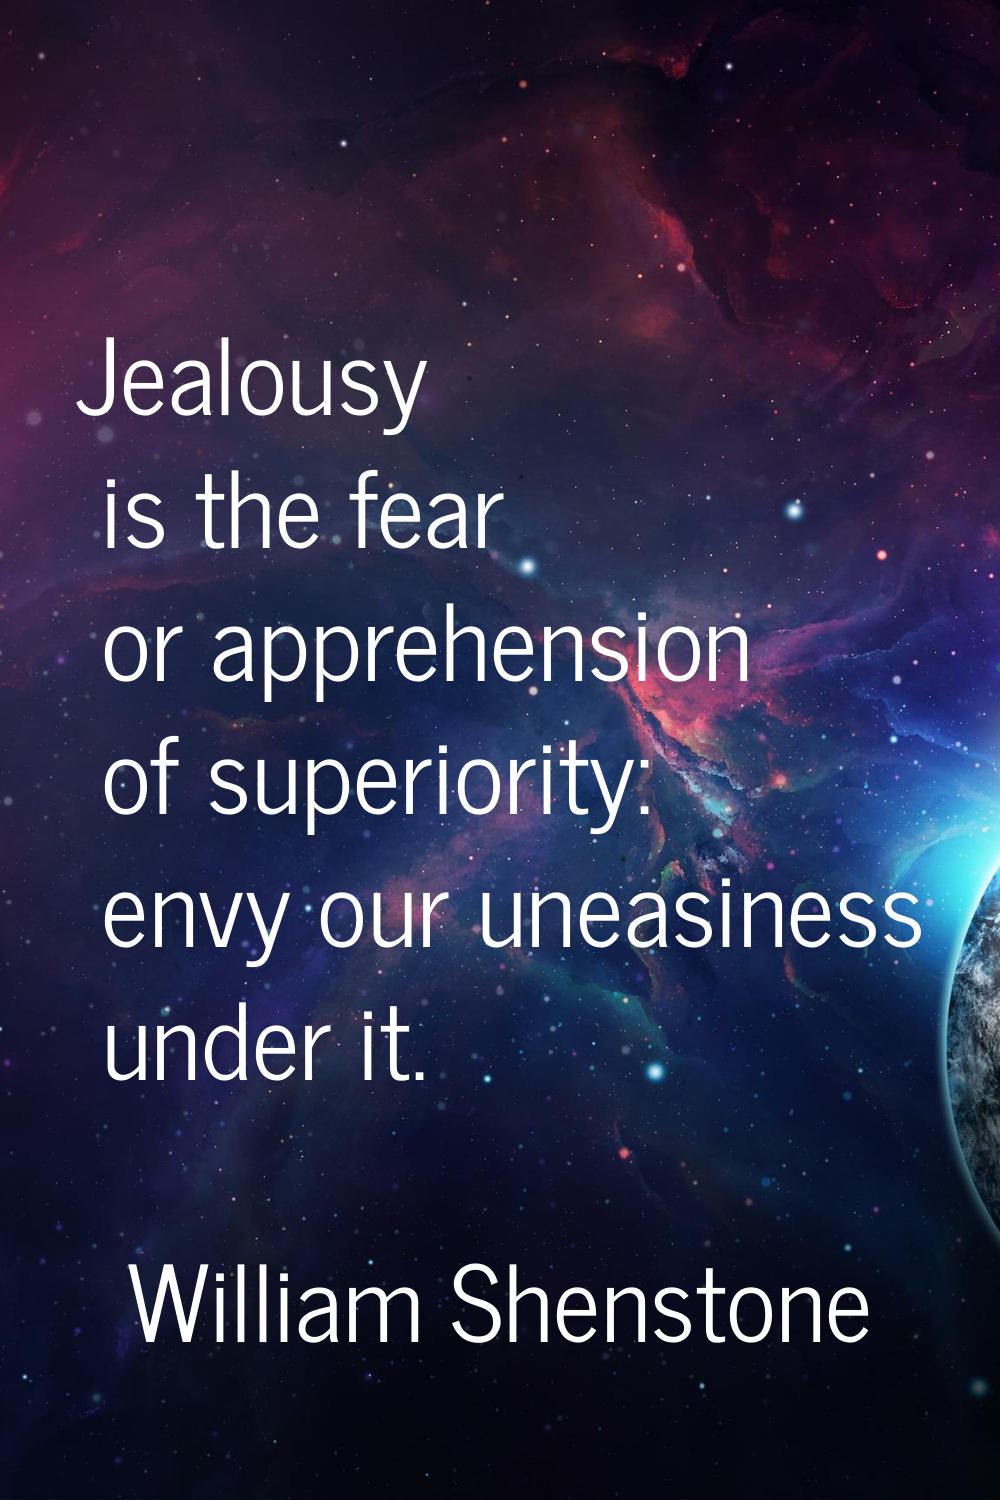 Jealousy is the fear or apprehension of superiority: envy our uneasiness under it.